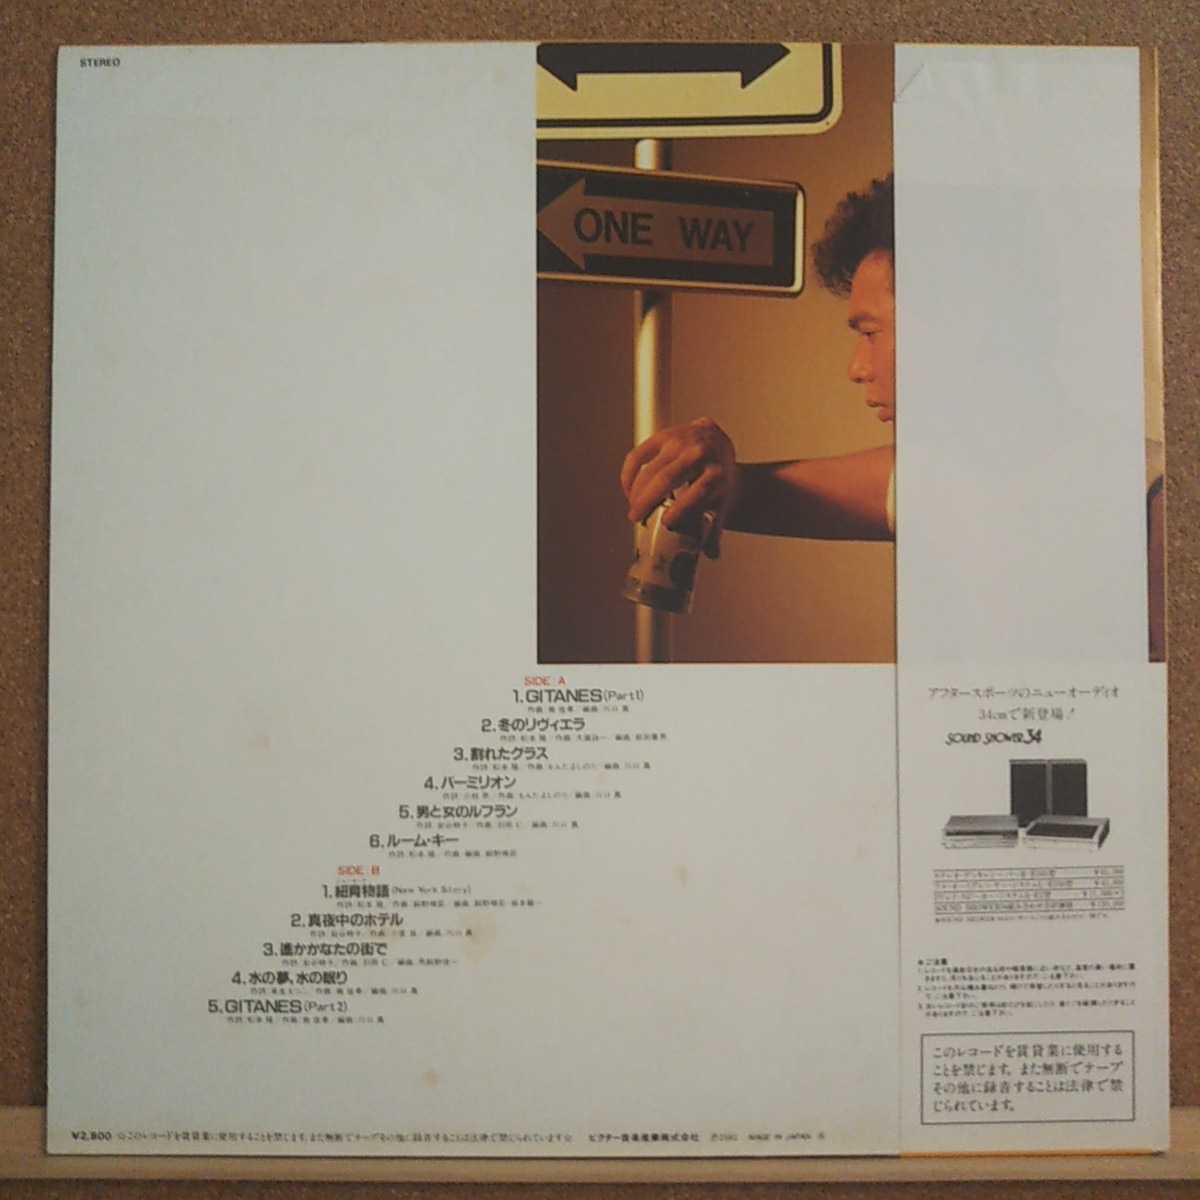 LP( obi attaching ) forest . one / cord . monogatari ( New York thing ...)( participation : Minami Yoshitaka, Hosono Haruomi )[ including in a package possibility 4 sheets till ]0905